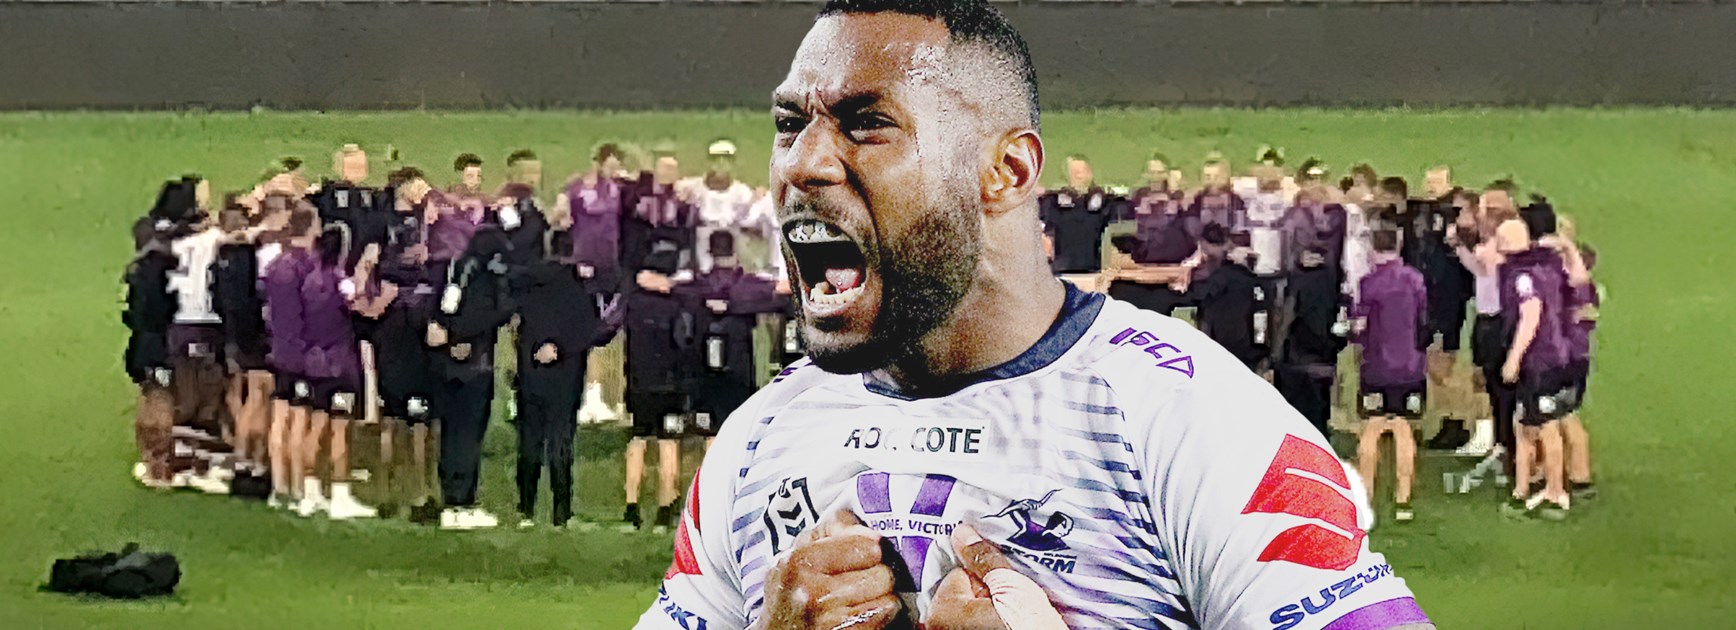 'I want to come back': Storm send off Suliasi with Fijian hymn tribute